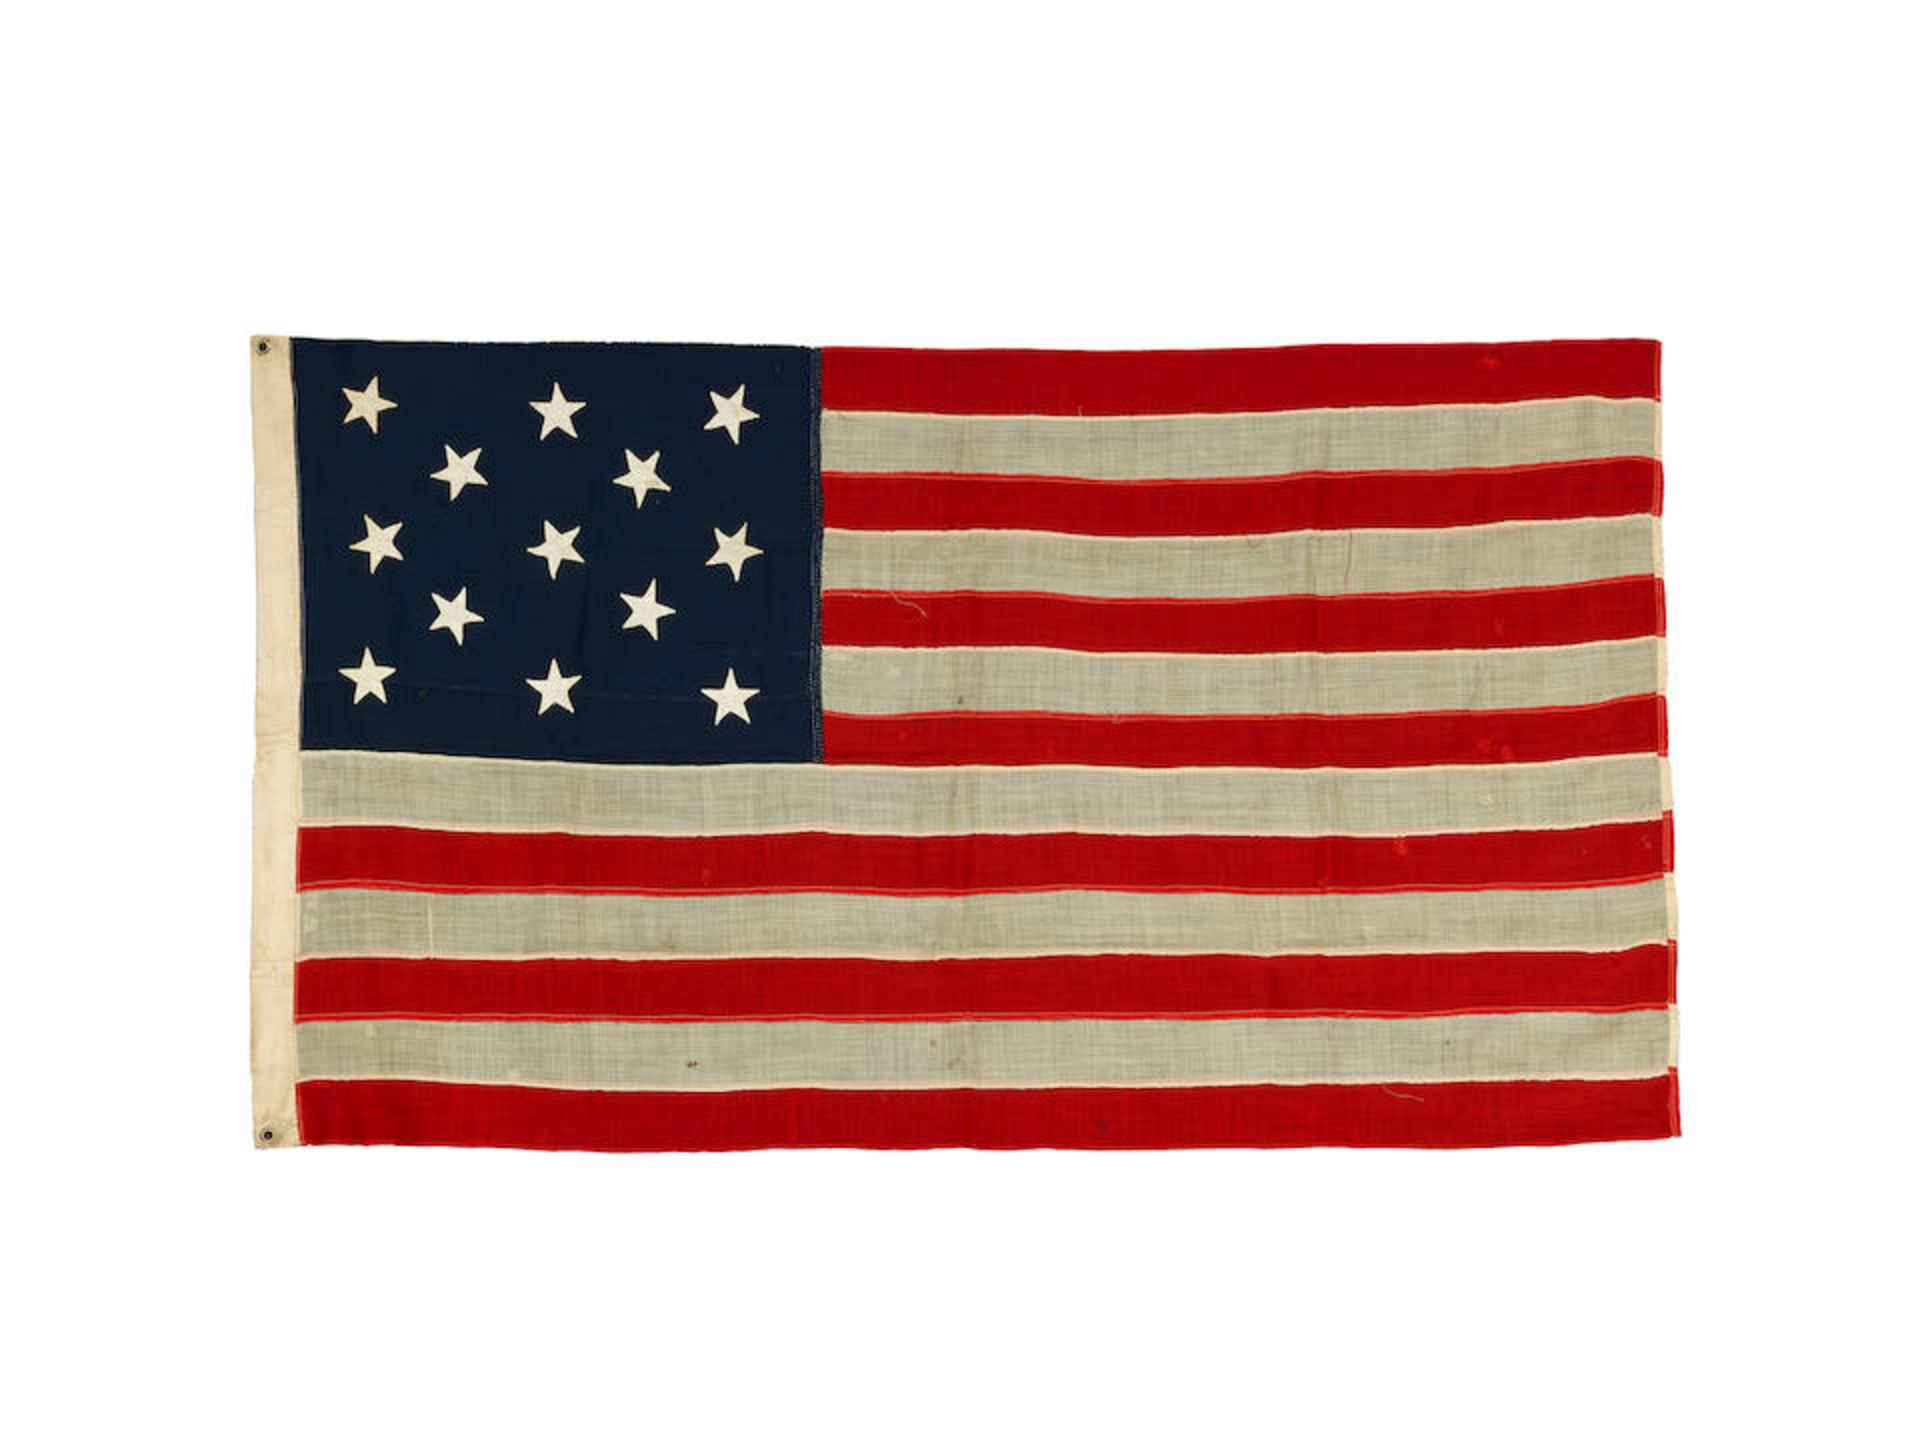 TWO 13-STAR US NAVY BOAT FLAGS. [USA: first half of 20th century.]